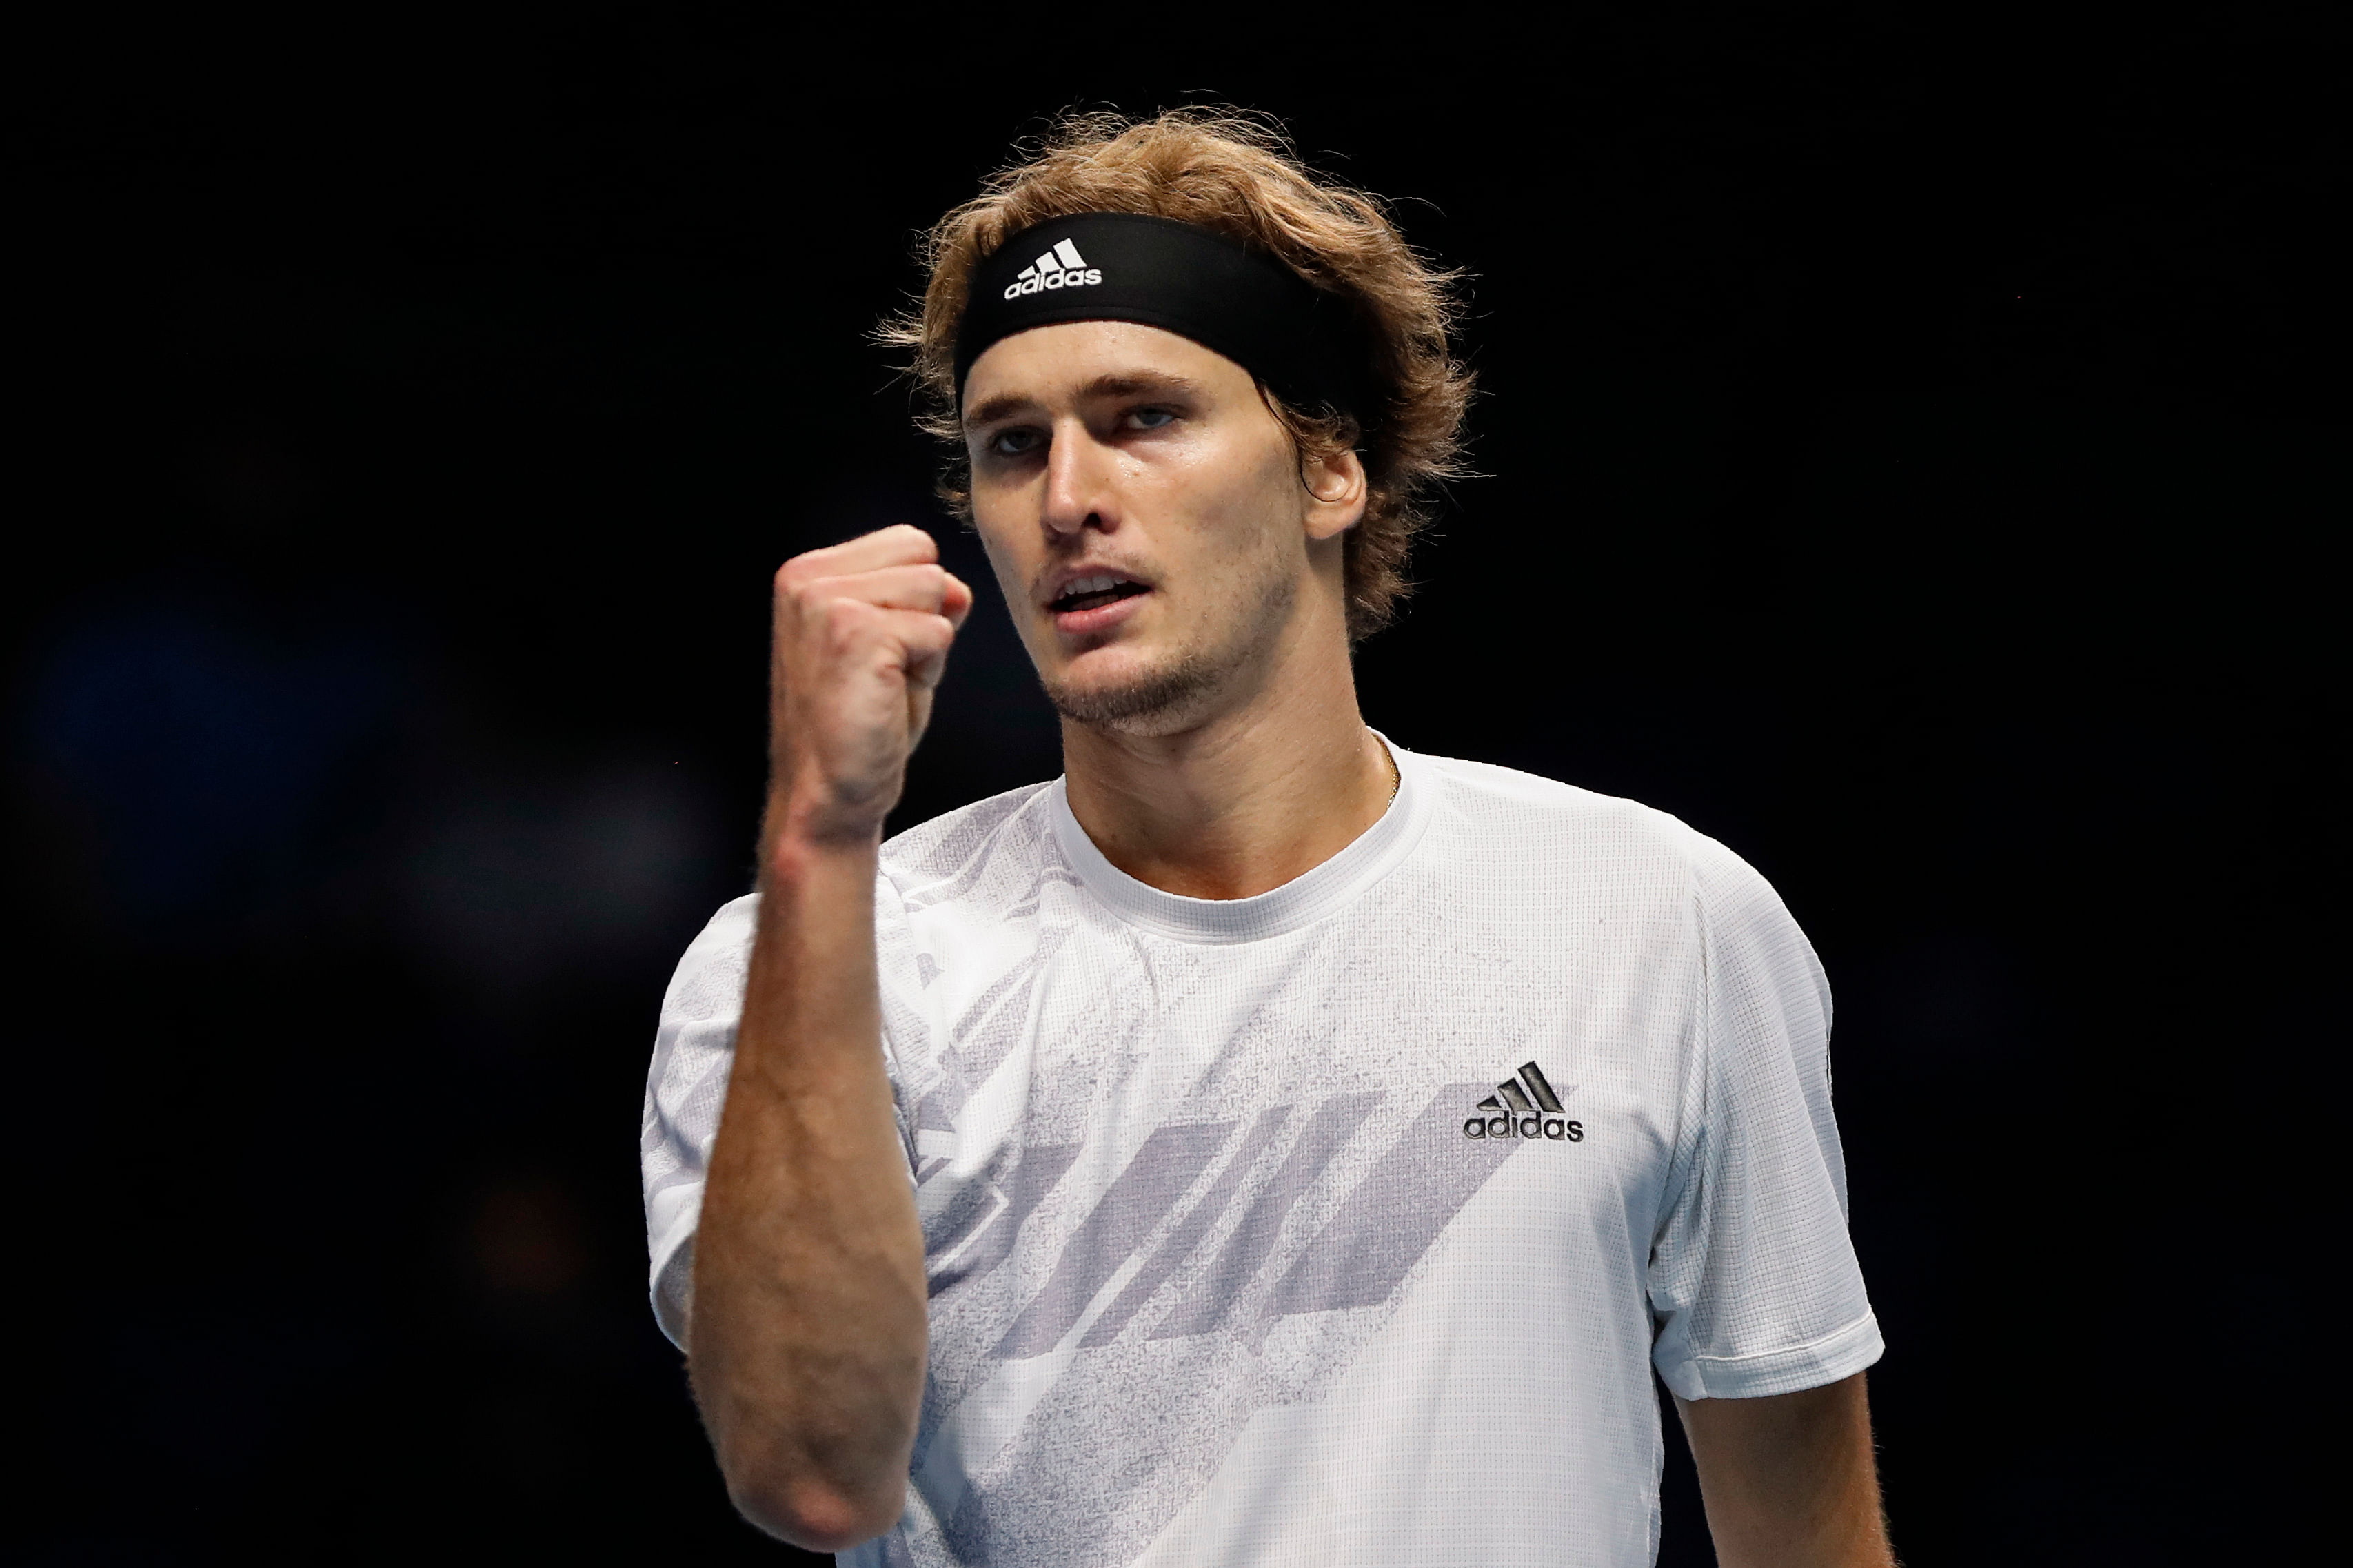 Alexander Zverev of Germany celebrates winning against Diego Schwartzman of Argentina during their tennis match at the ATP World Finals tennis tournament at the O2 arena in London, Wednesday, Nov. 18, 2020. Credit: AP/PTI 